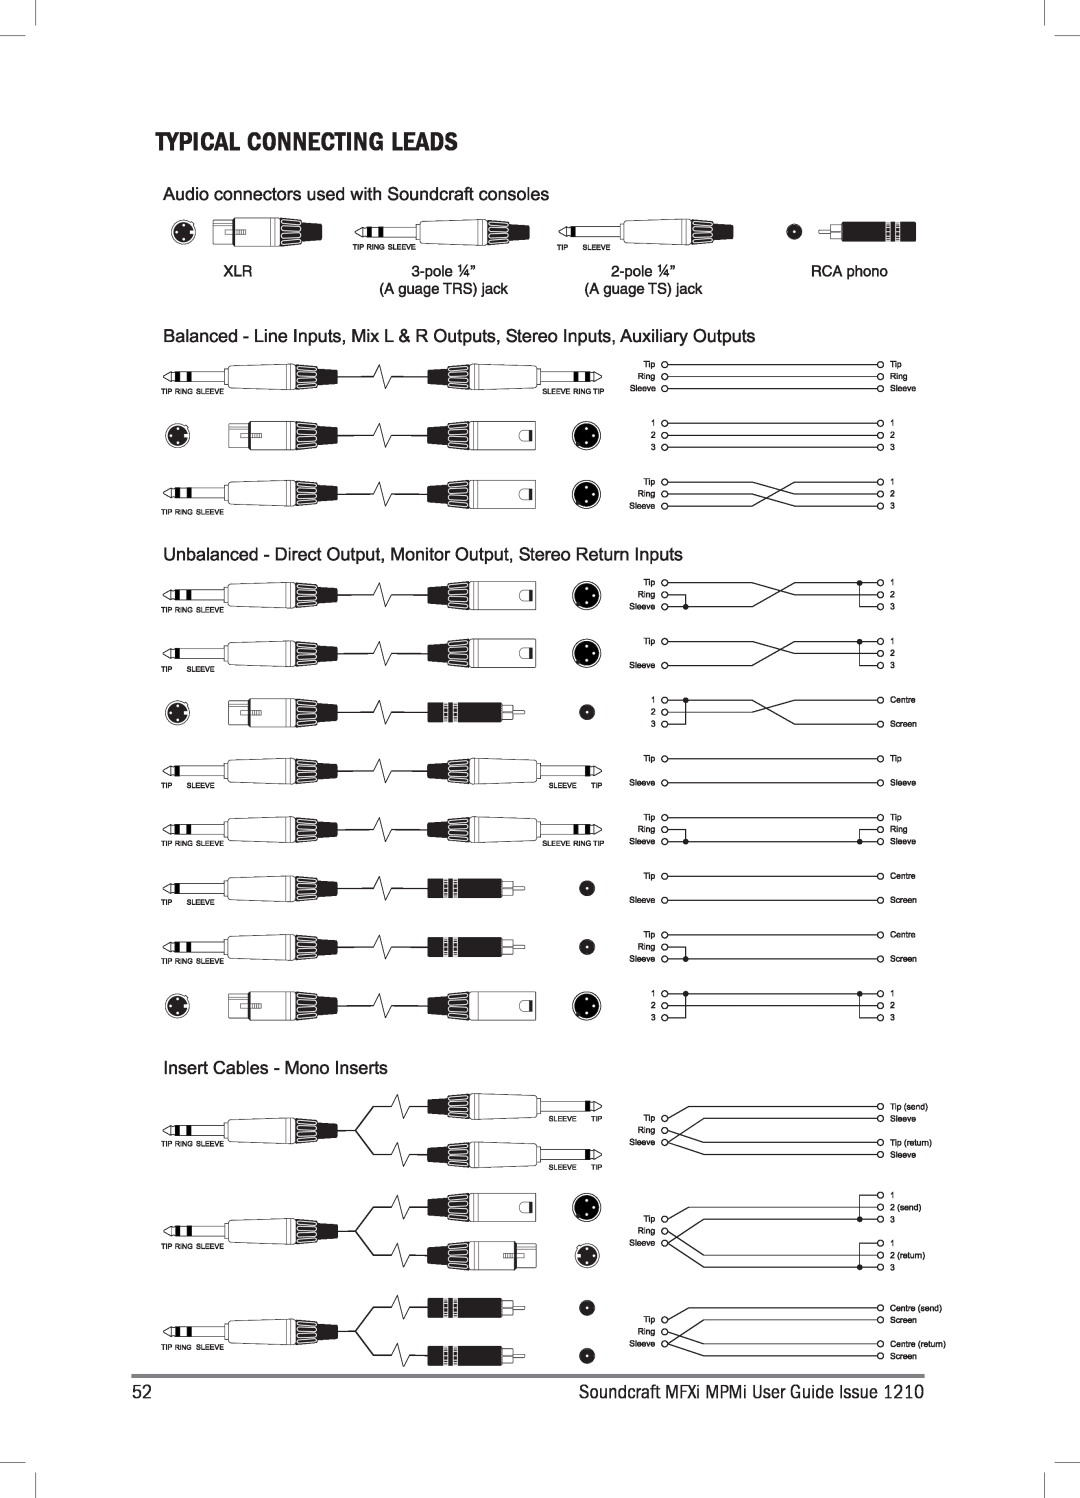 Harman MPMI, MFXI manual Typical Connecting Leads, Soundcraft MFXi MPMi User Guide Issue 